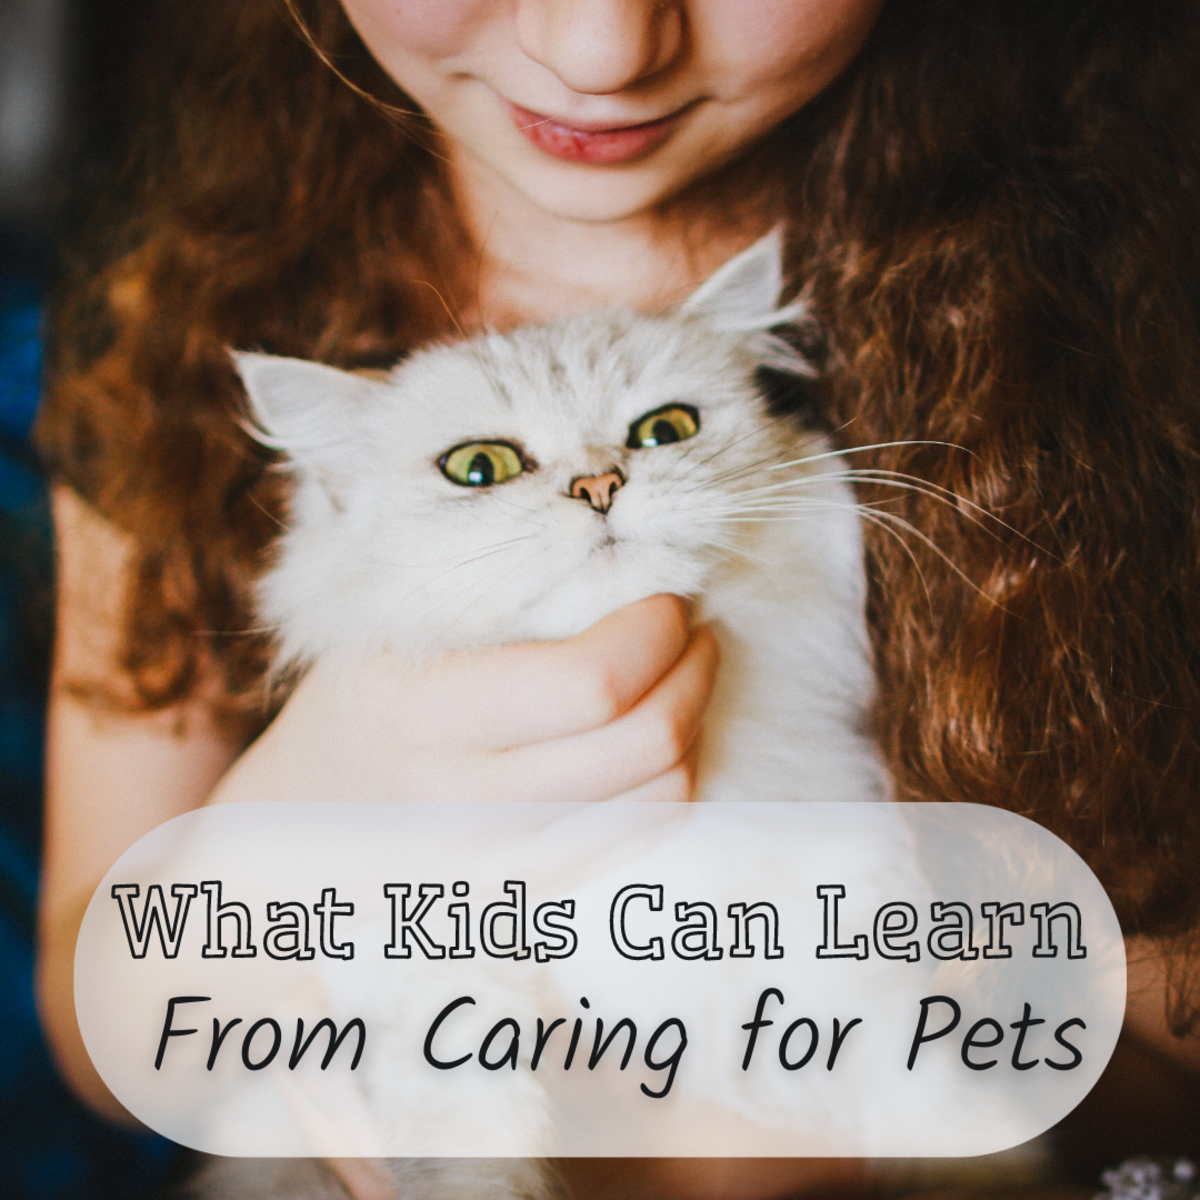 What Can Children Learn From Looking After a Pet?